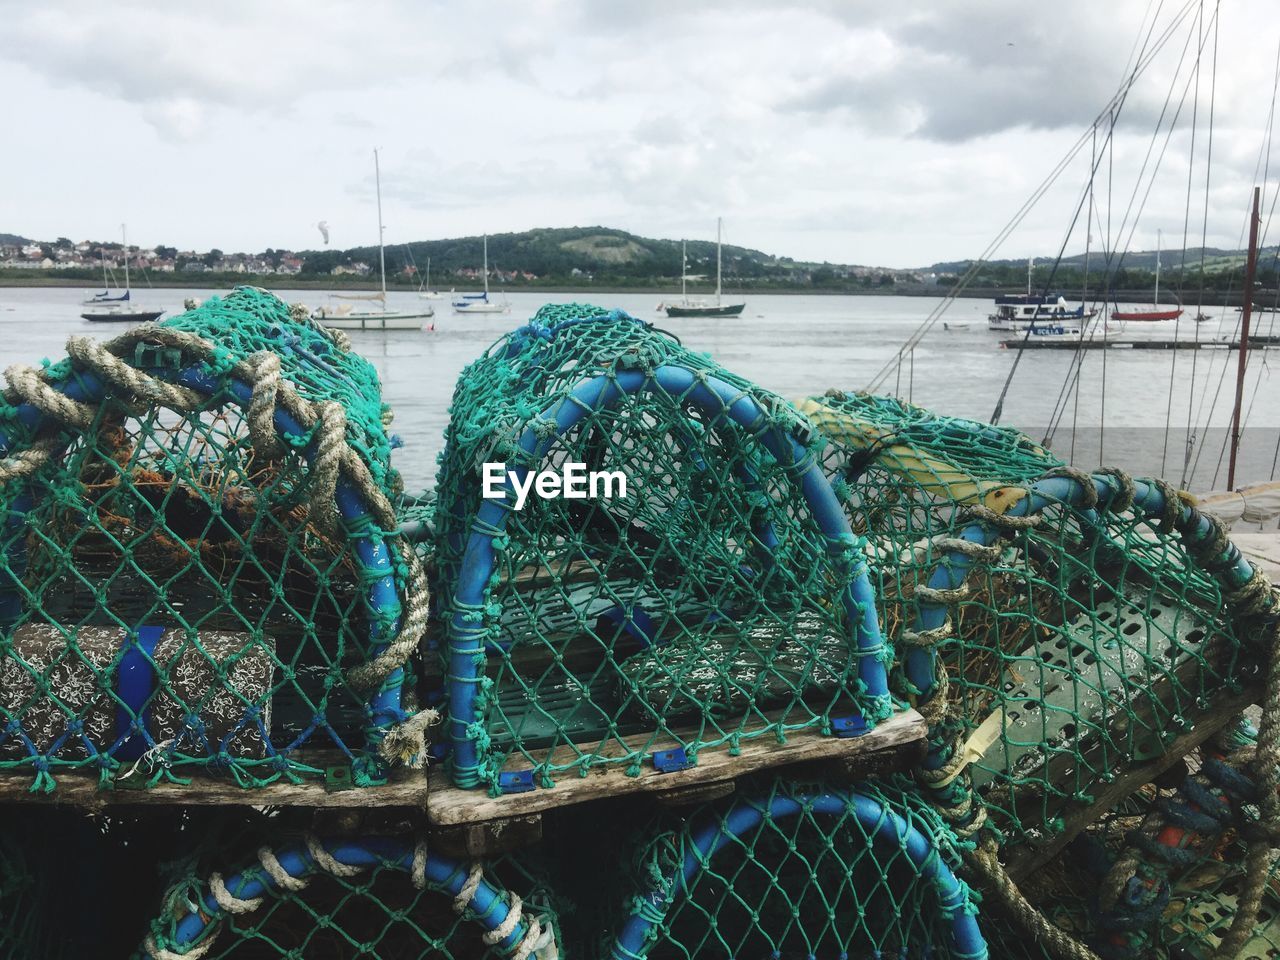 VIEW OF FISHING NET AT HARBOR